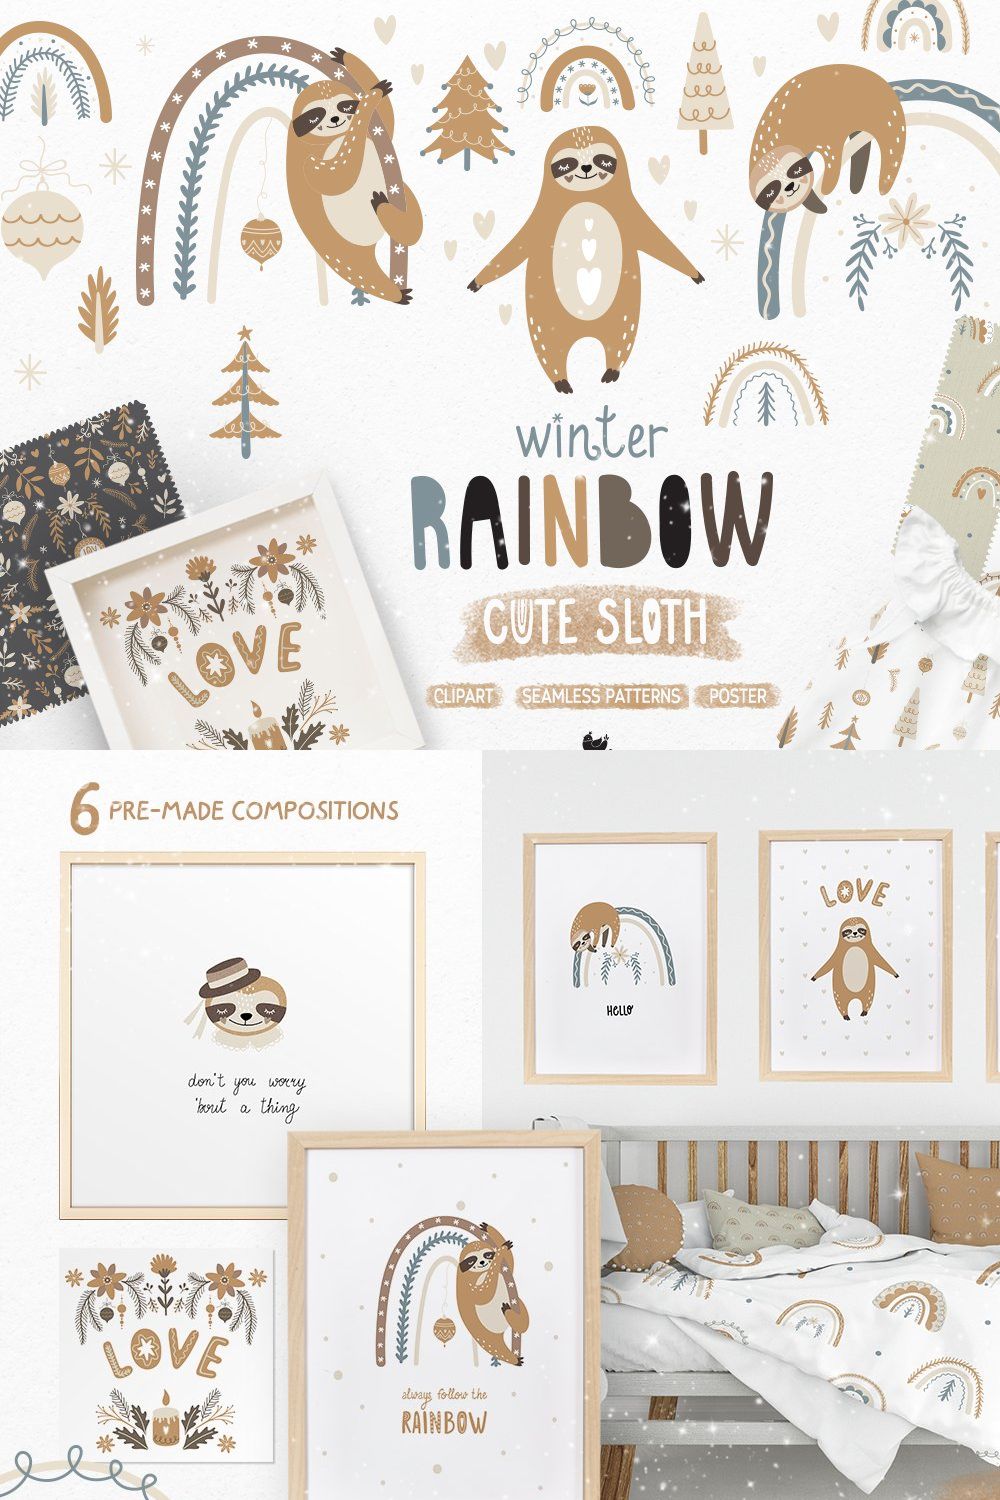 Winter Rainbow & Cute Sloth pinterest preview image.